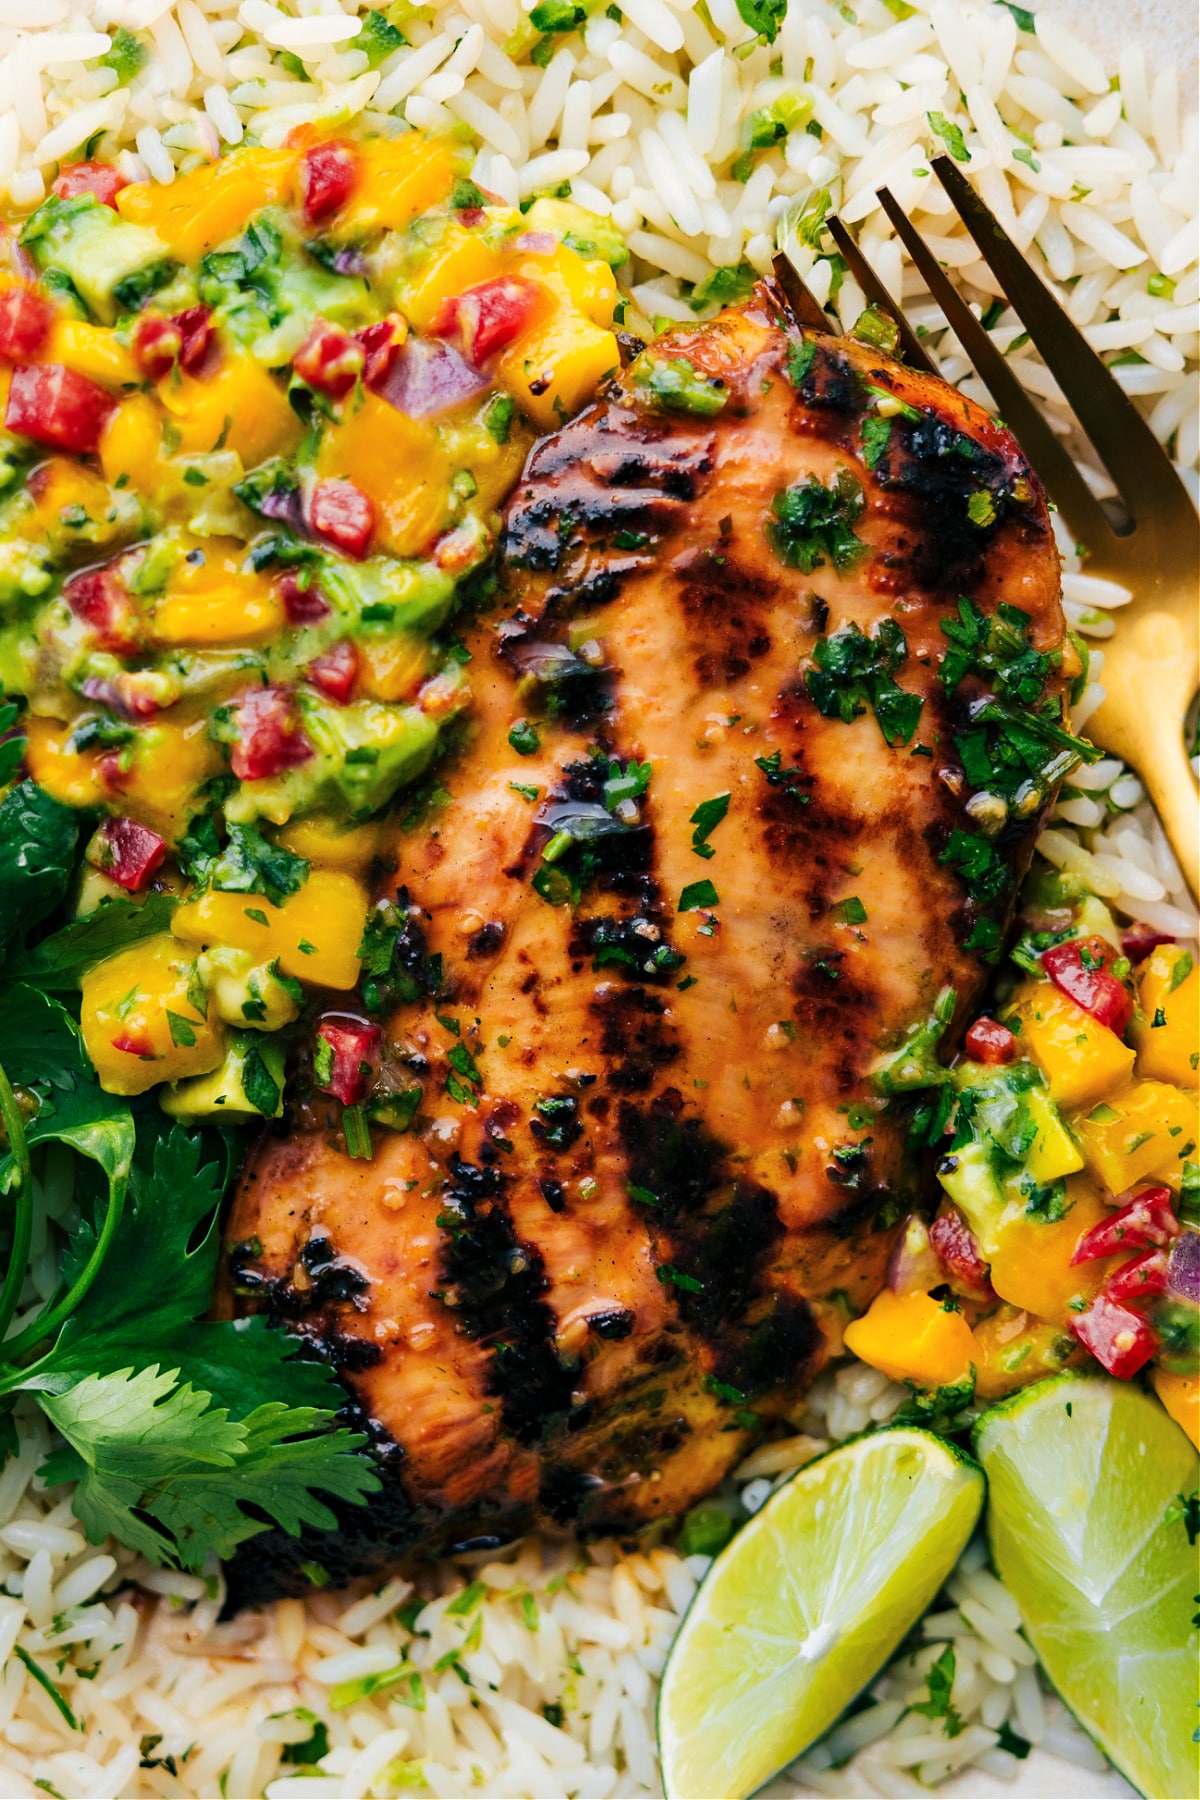 The Cilantro Lime Chicken on a bed of rice with fresh mango salsa on it ready to be enjoyed.